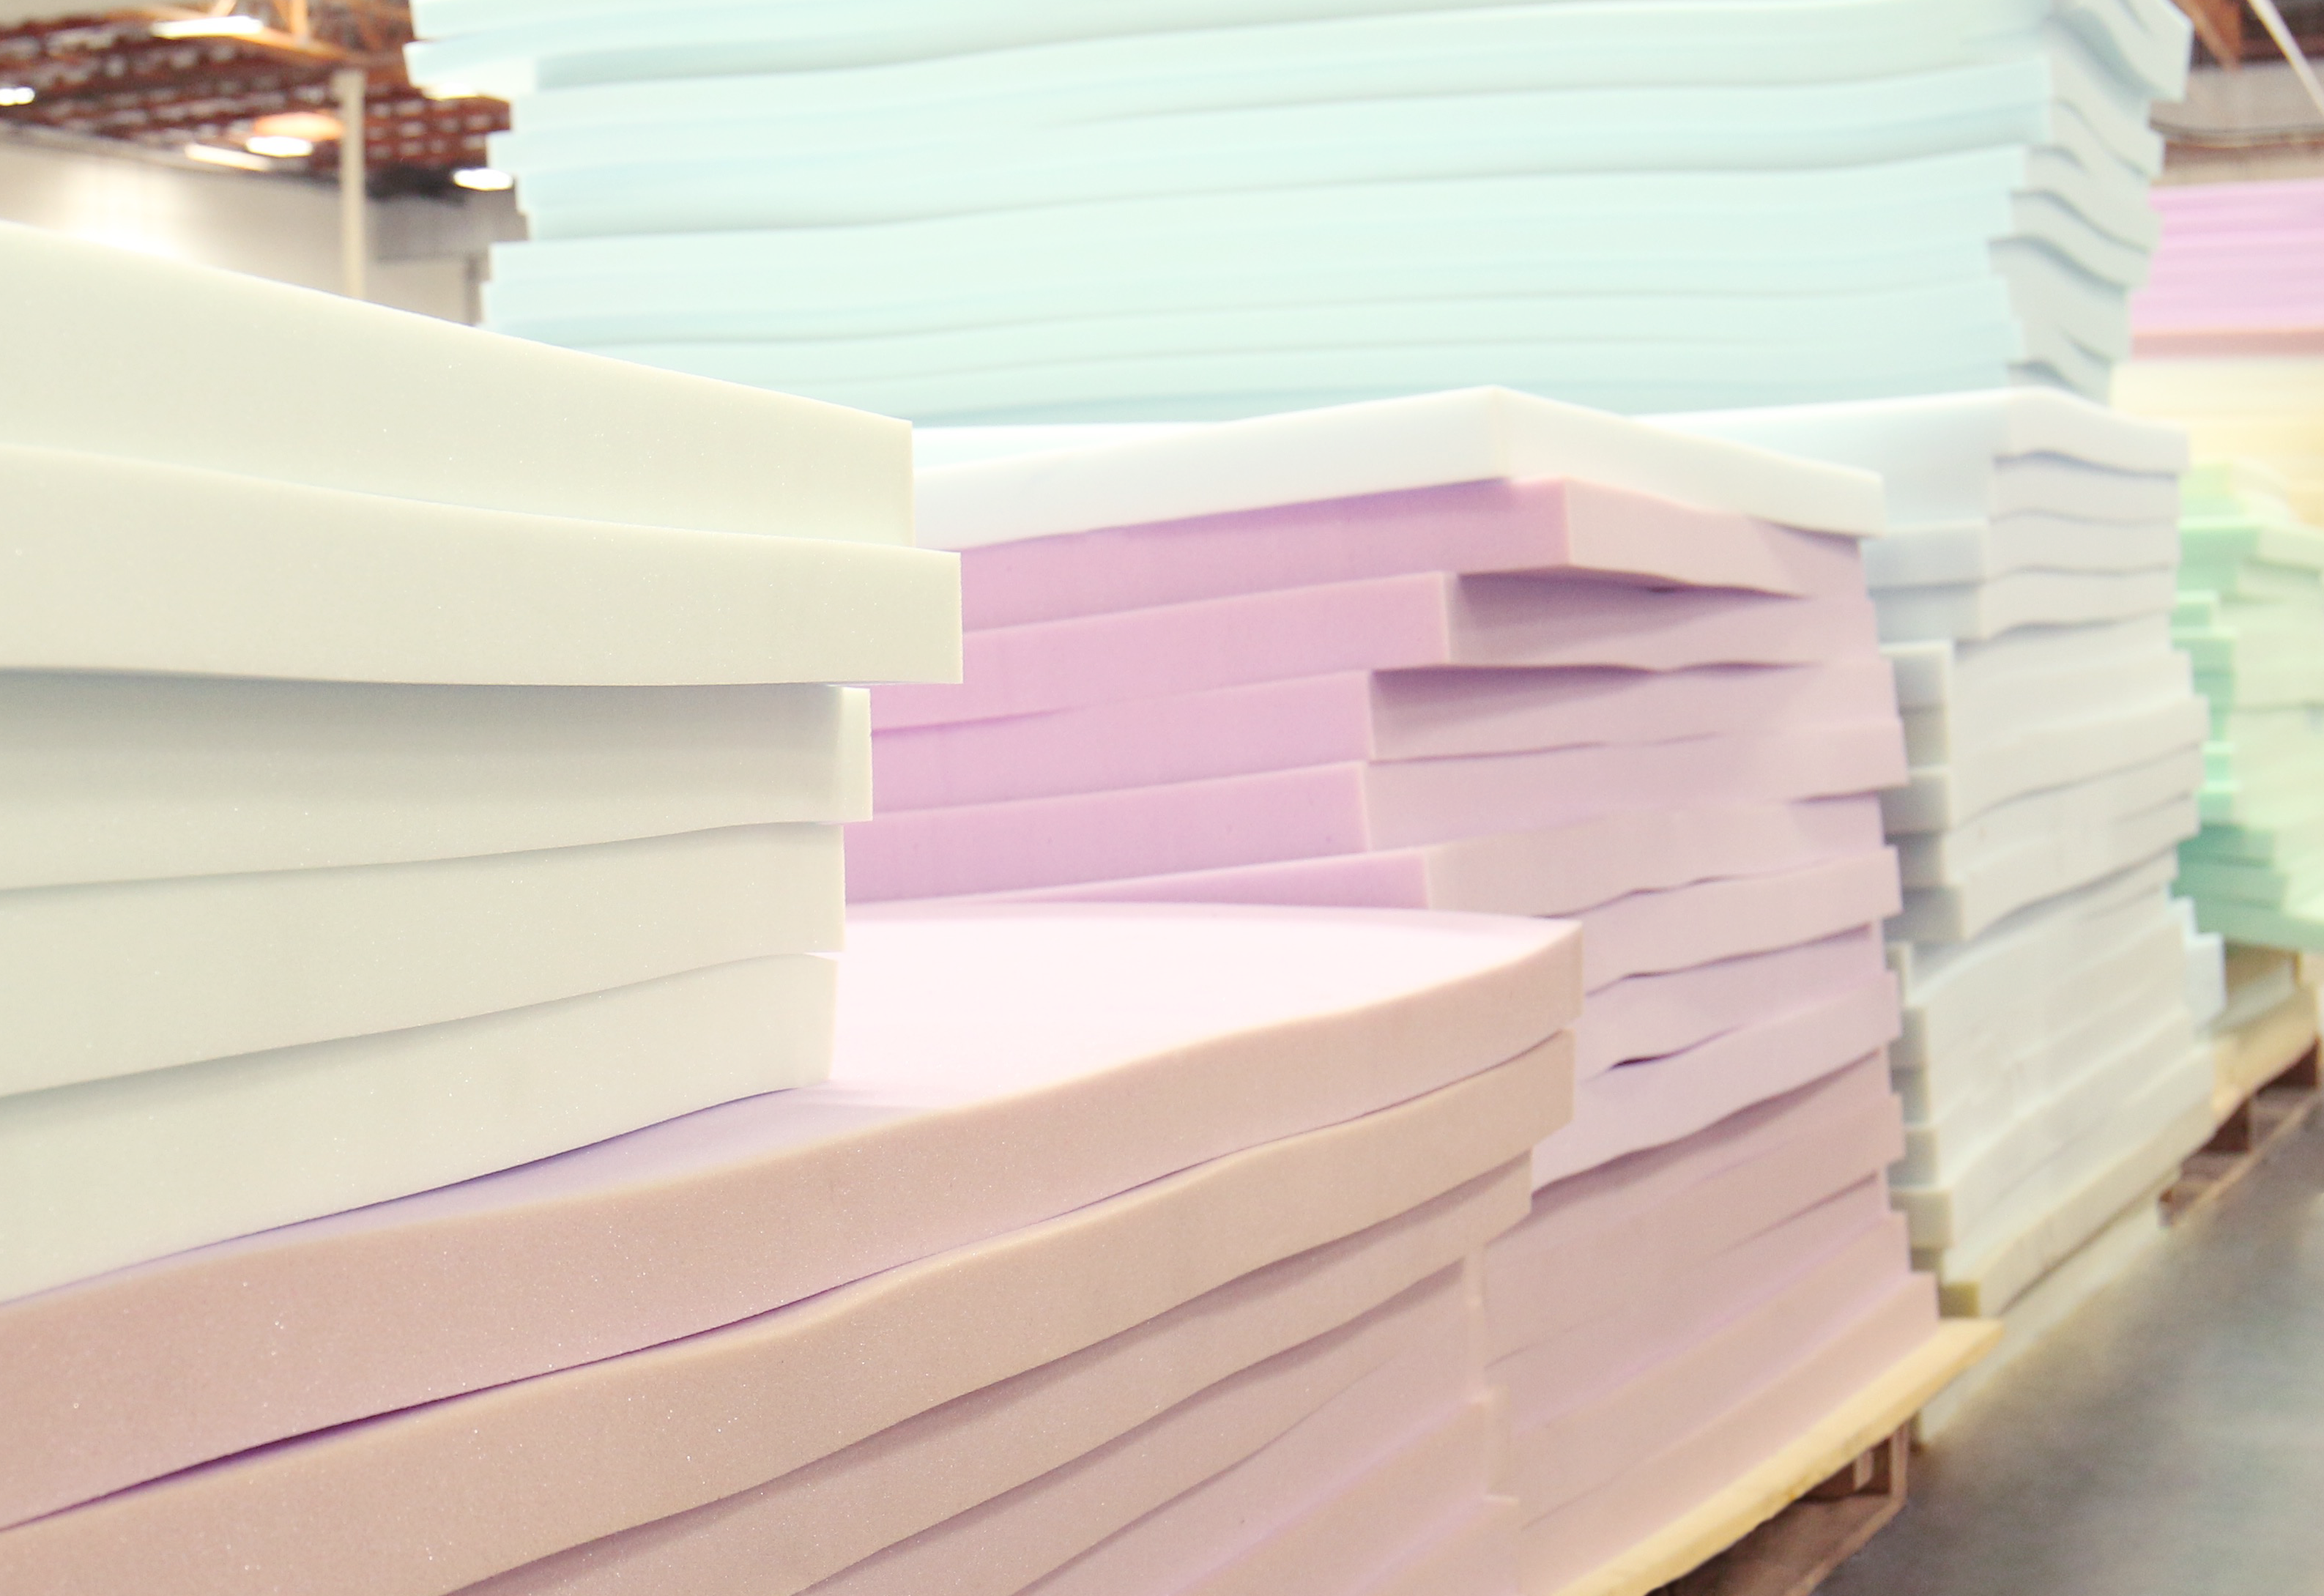 Quality Materials Used In Helix Mattresses